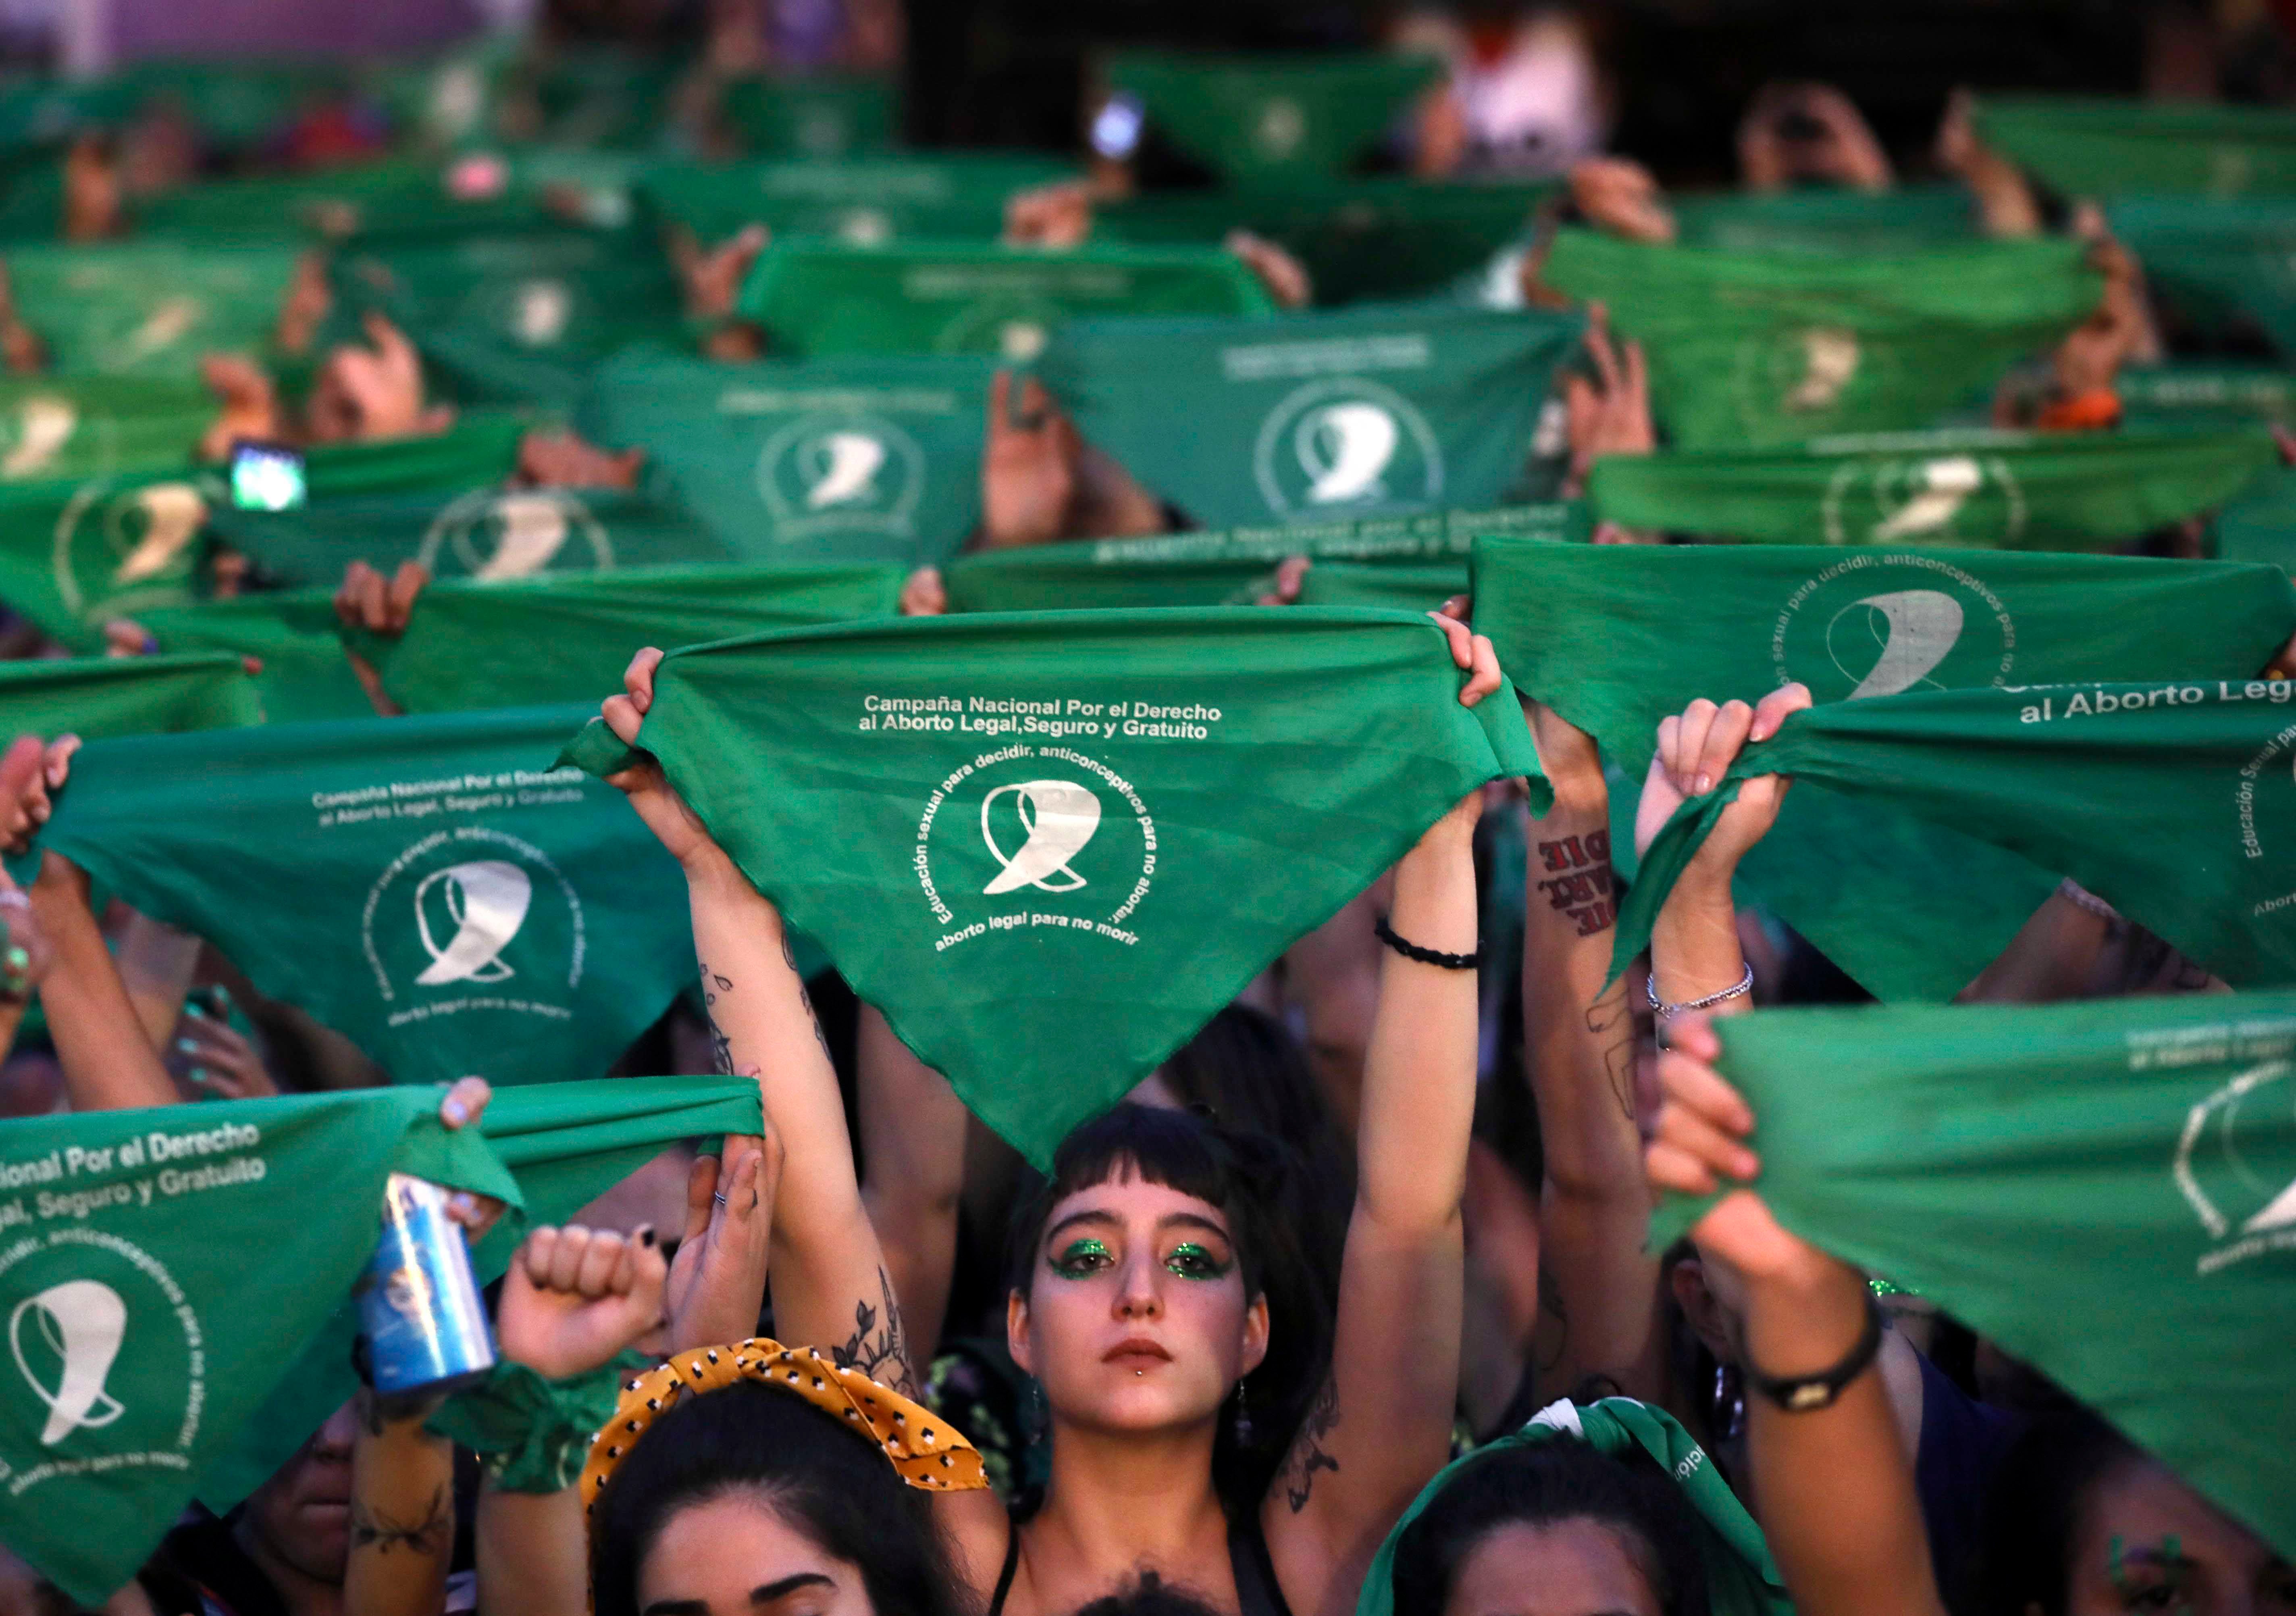 A crowd of women hold up green protest signs